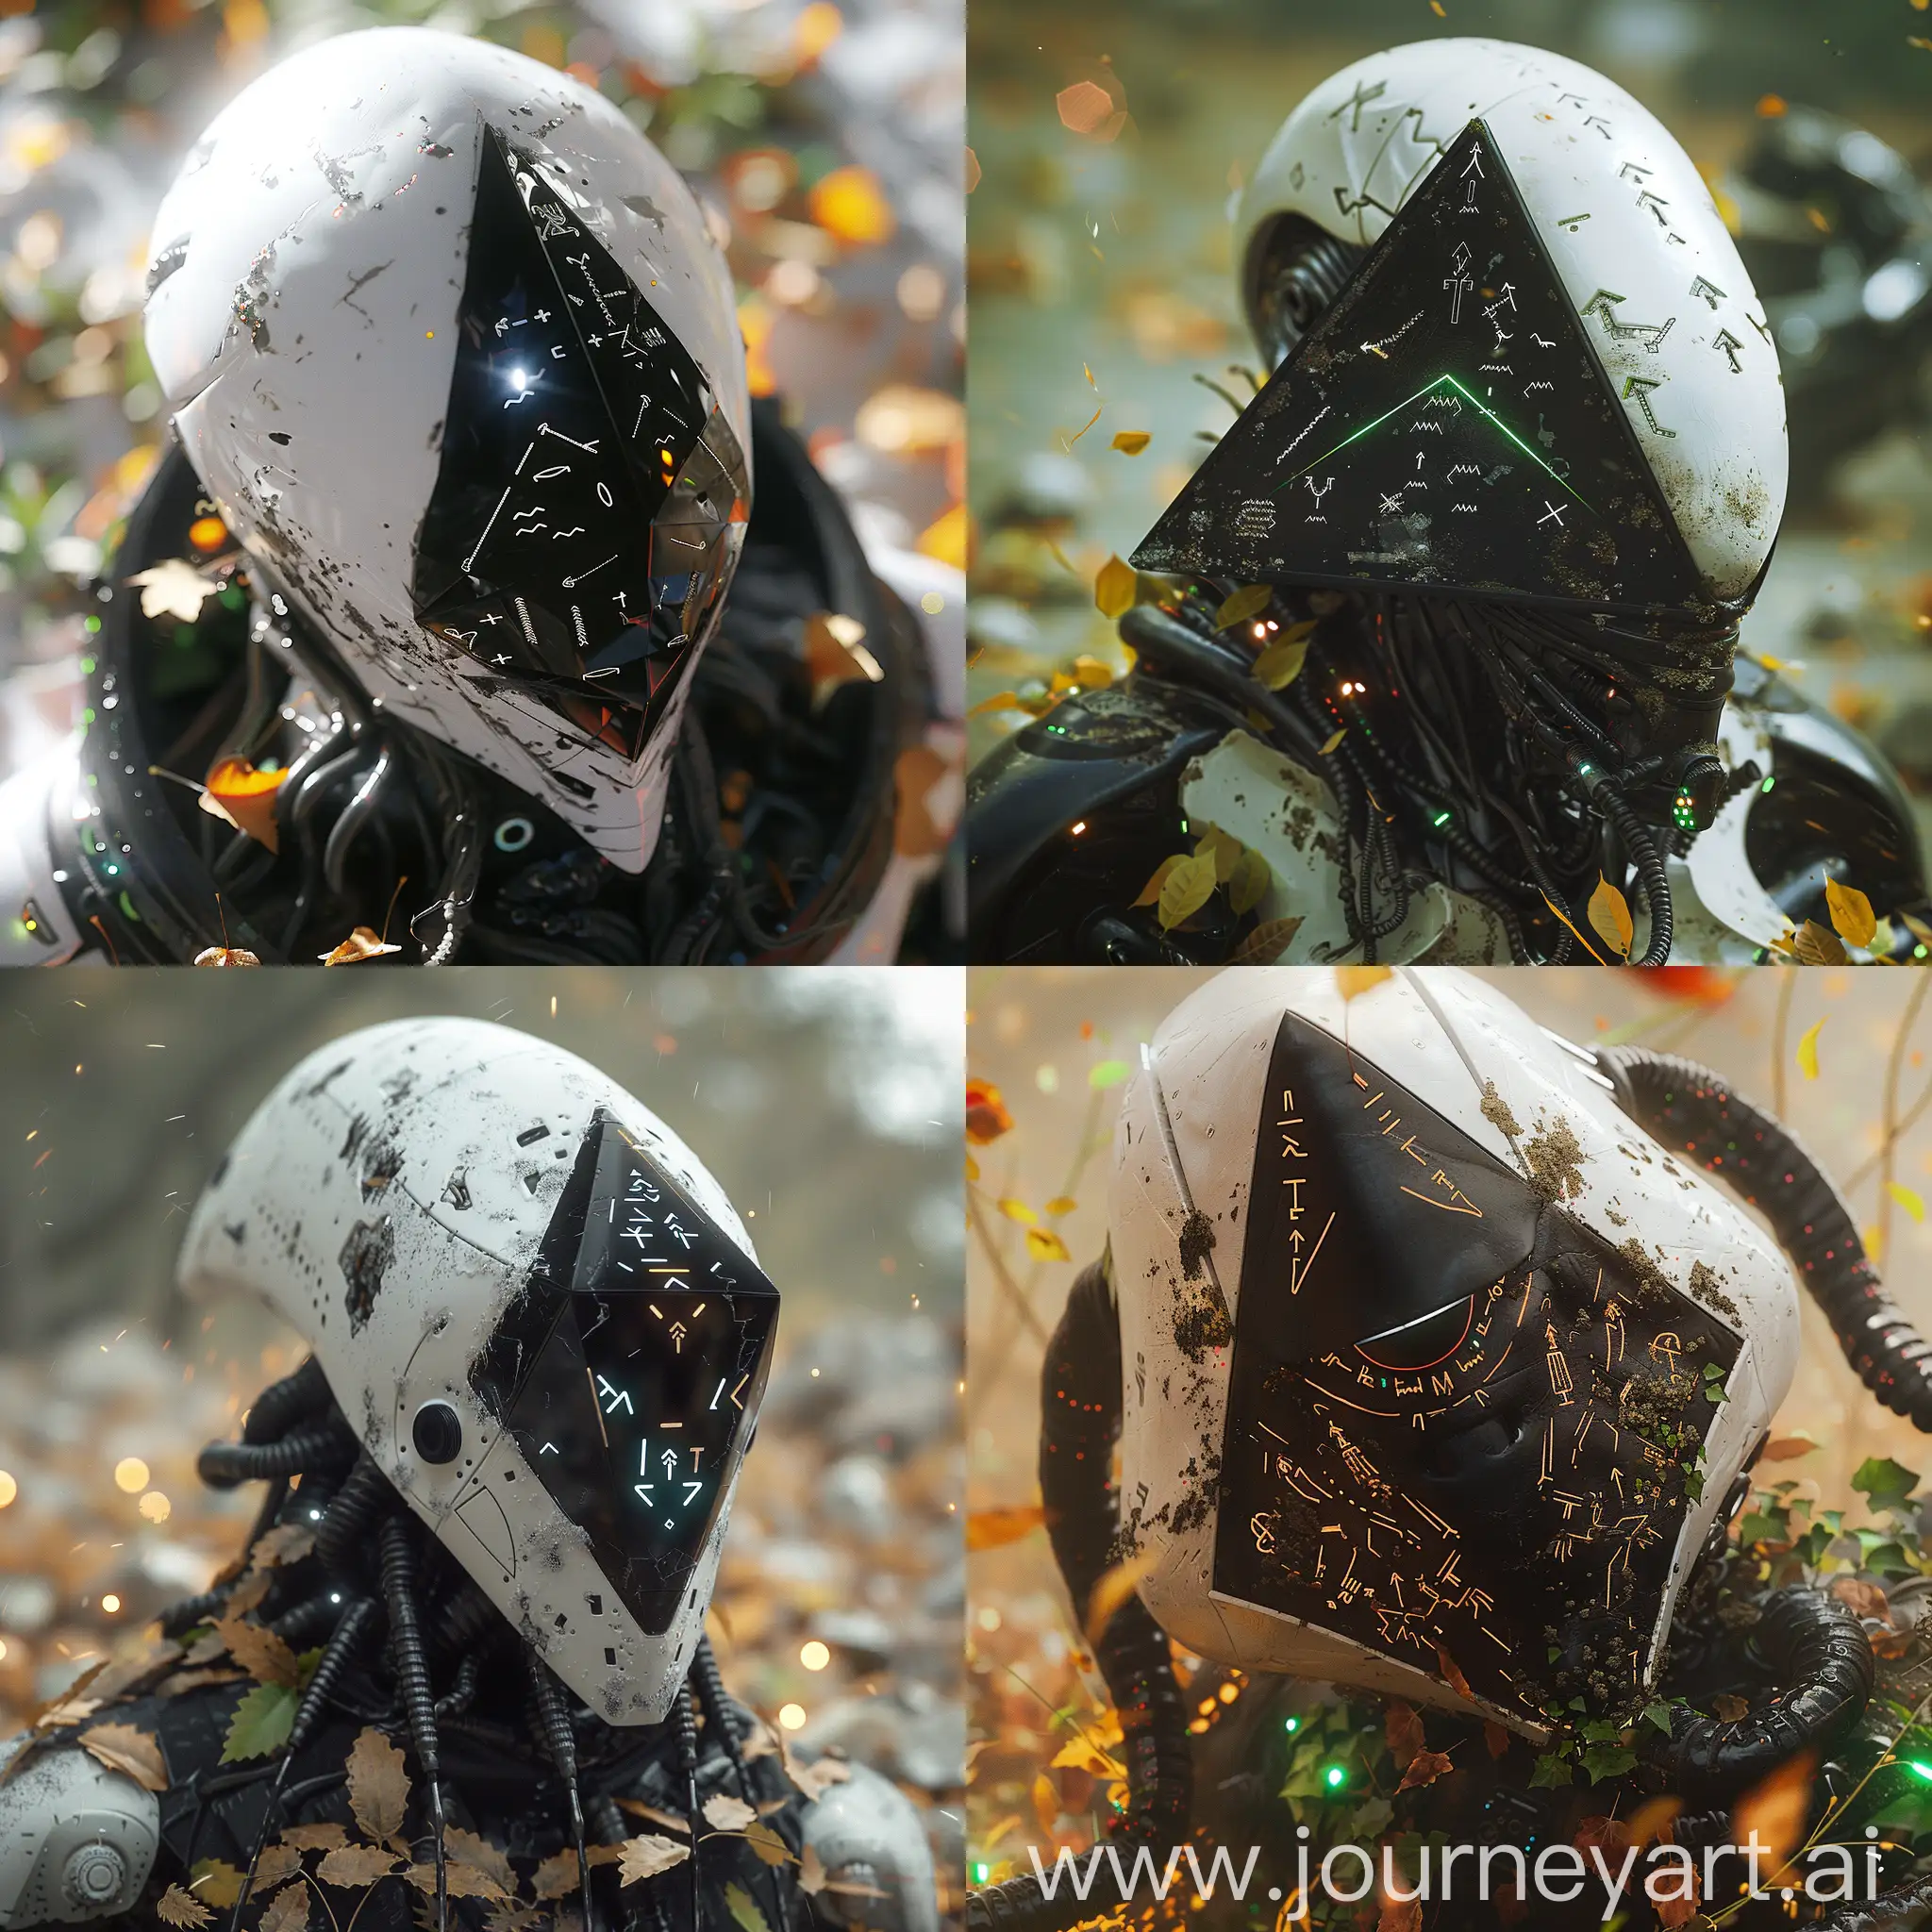 a dynamic close up cinematic Creative photography portrait,natural lighting daytime, zbrush, 8k, natural colourful environment of an alien space capsule, unique angles, epic lighting, ultradetailed, dslr,c4d, futuristic, nikon d750, lomo,showing  a white amd black leviathan alien creature with a black triangular shaped head with tentacles and LED for glowing effect and glowing hieroglyphics embedded on it covered in dust and leaves,eery aesthetic wearing edgy piercing Dystopian Detailed  armour evoking a dystopian essence . Each element is rendered in stunning high definition, capturing the essence of the cyberpunk world with unparalleled realism in this digital art piece